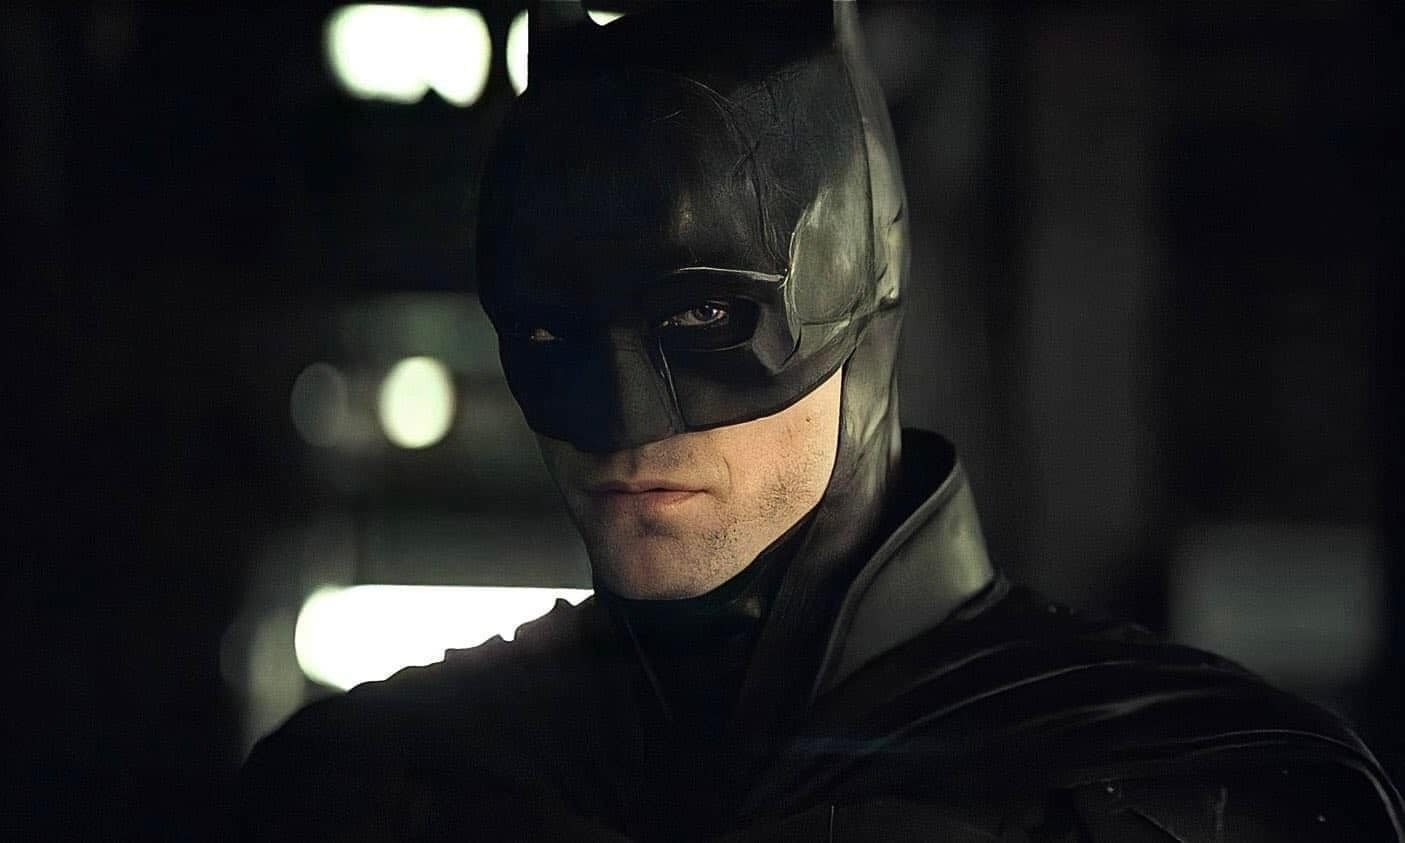 The Batman 2 officially announced with Robert Pattinson and Matt Reeves  returning